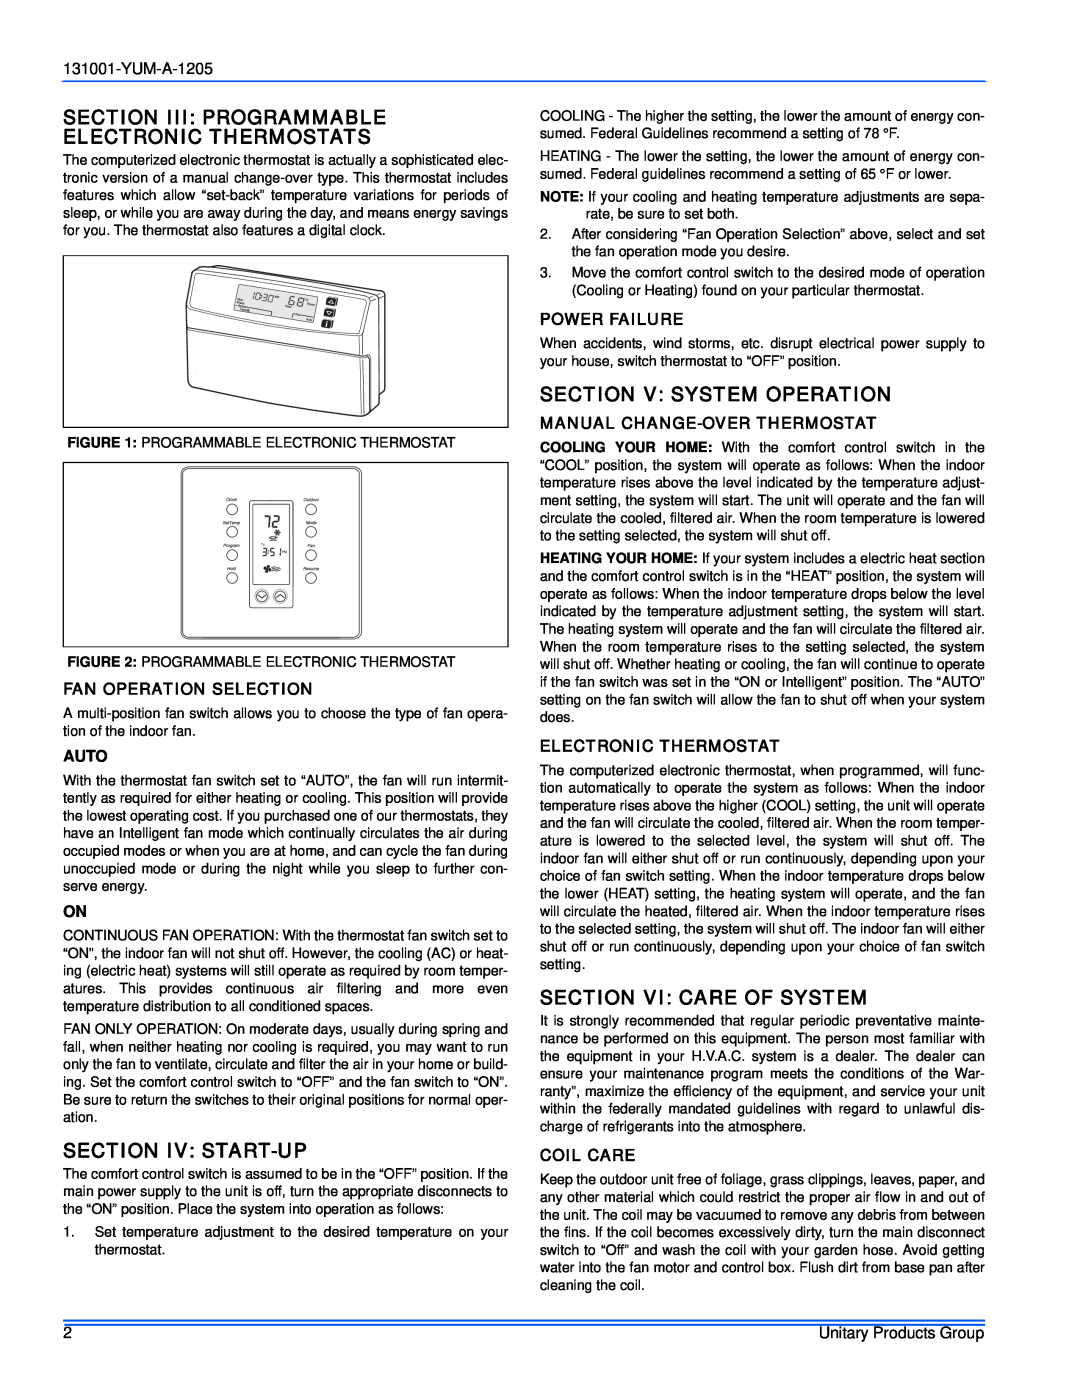 York 131001-YUM-A-1205 Section Iii Programmable Electronic Thermostats, Section Iv Start-Up, Section V System Operation 